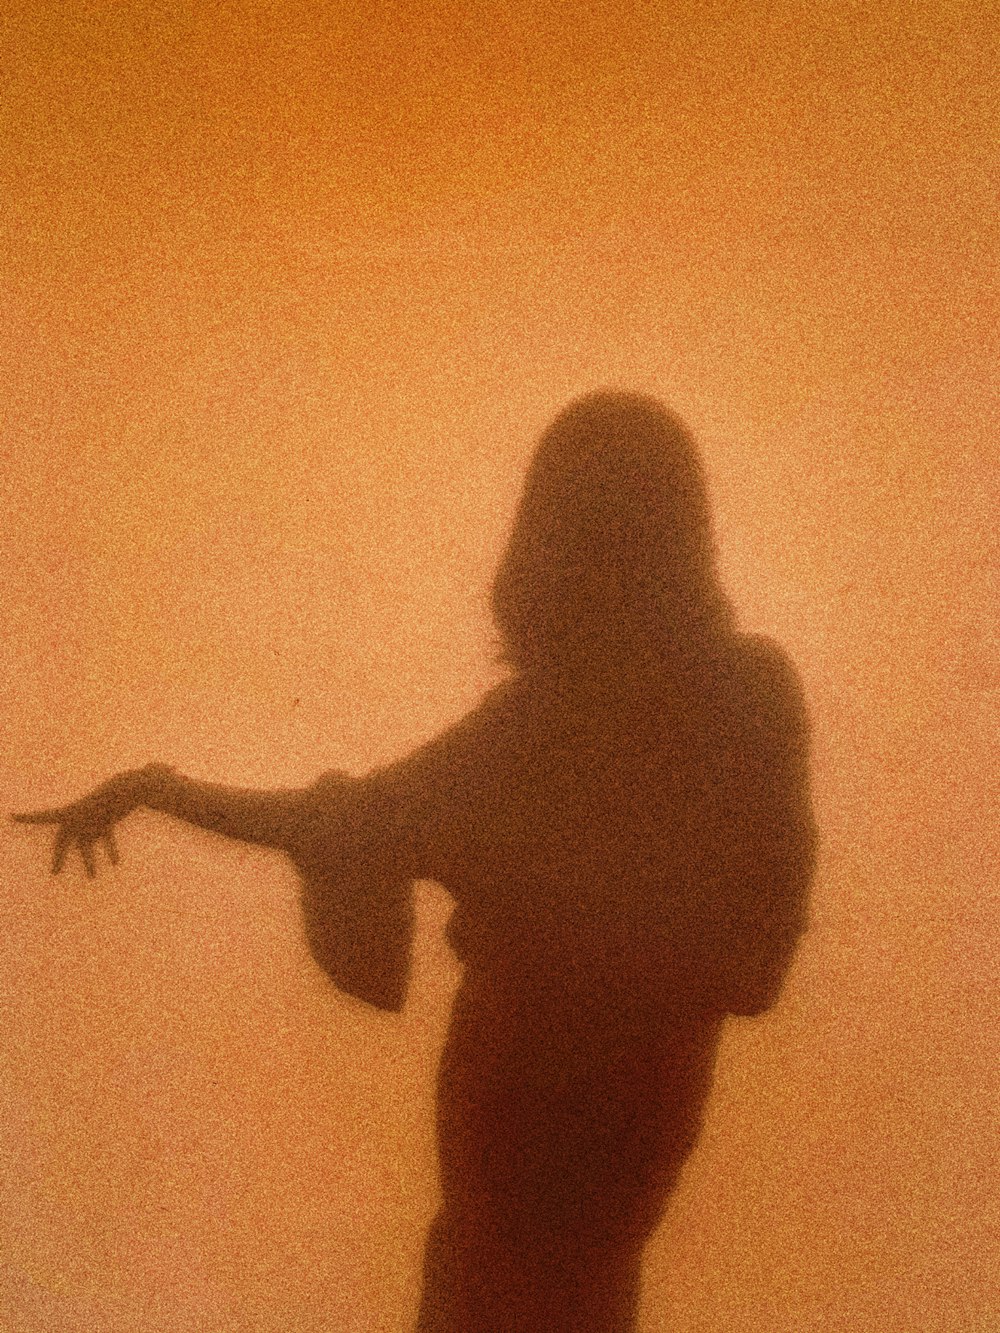 silhouette of woman standing and raising her right hand